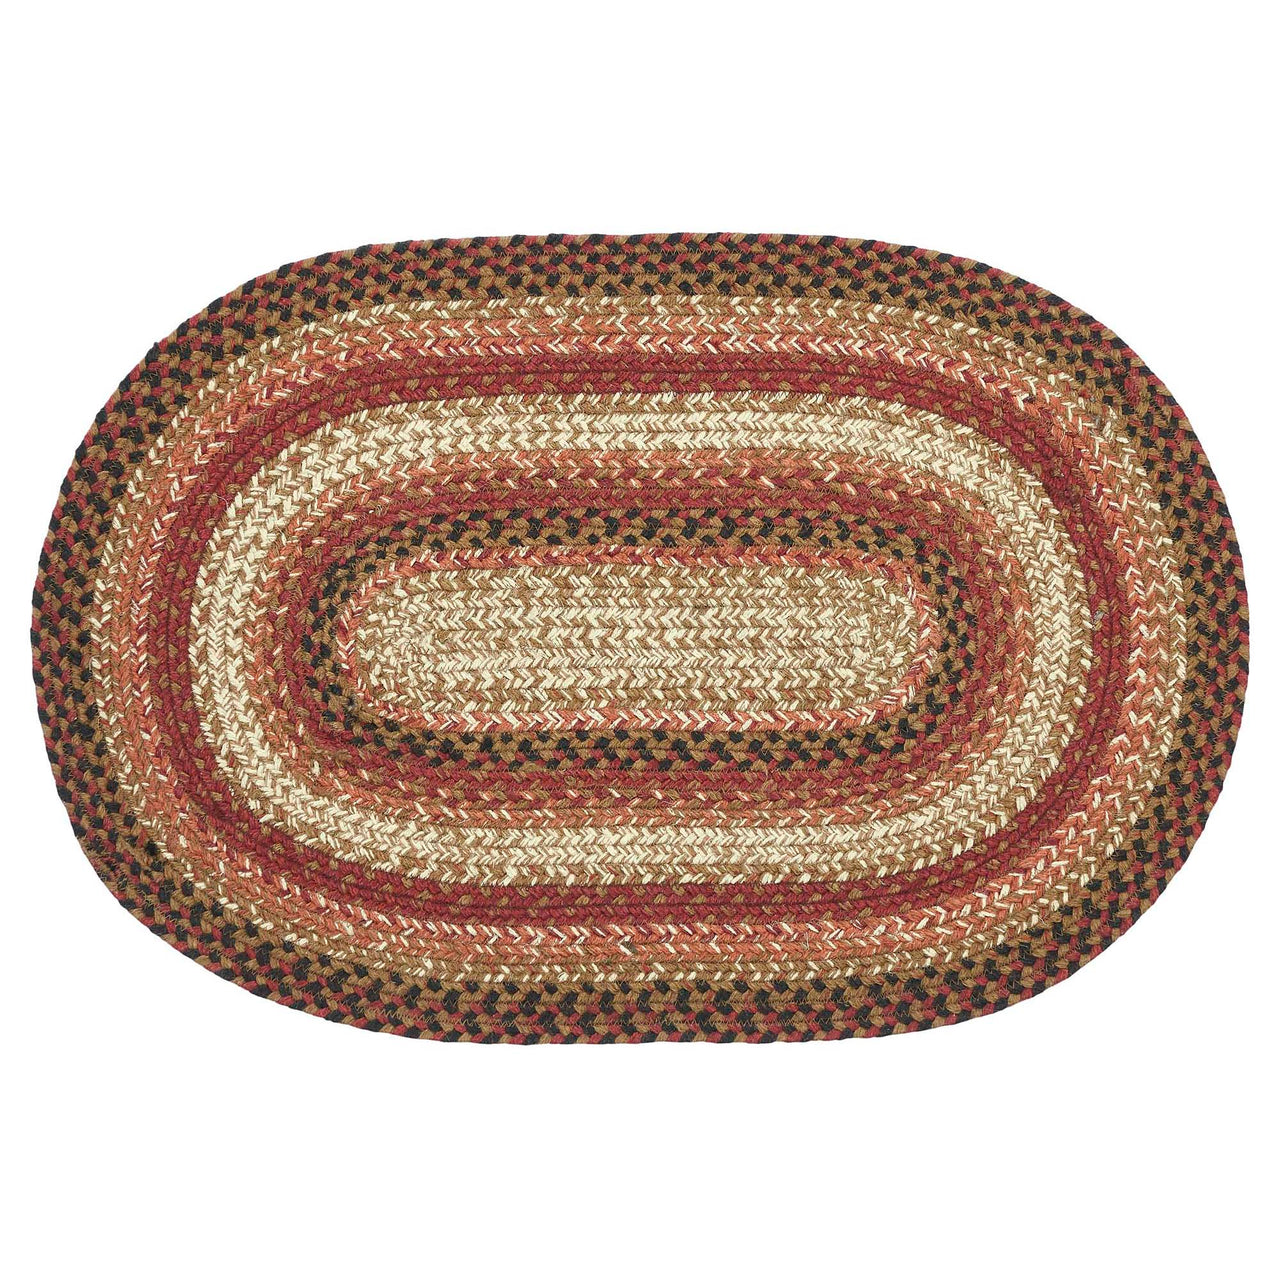 Ginger Spice Jute Braided Rug Oval with Rug Pad 20"x30" VHC Brands